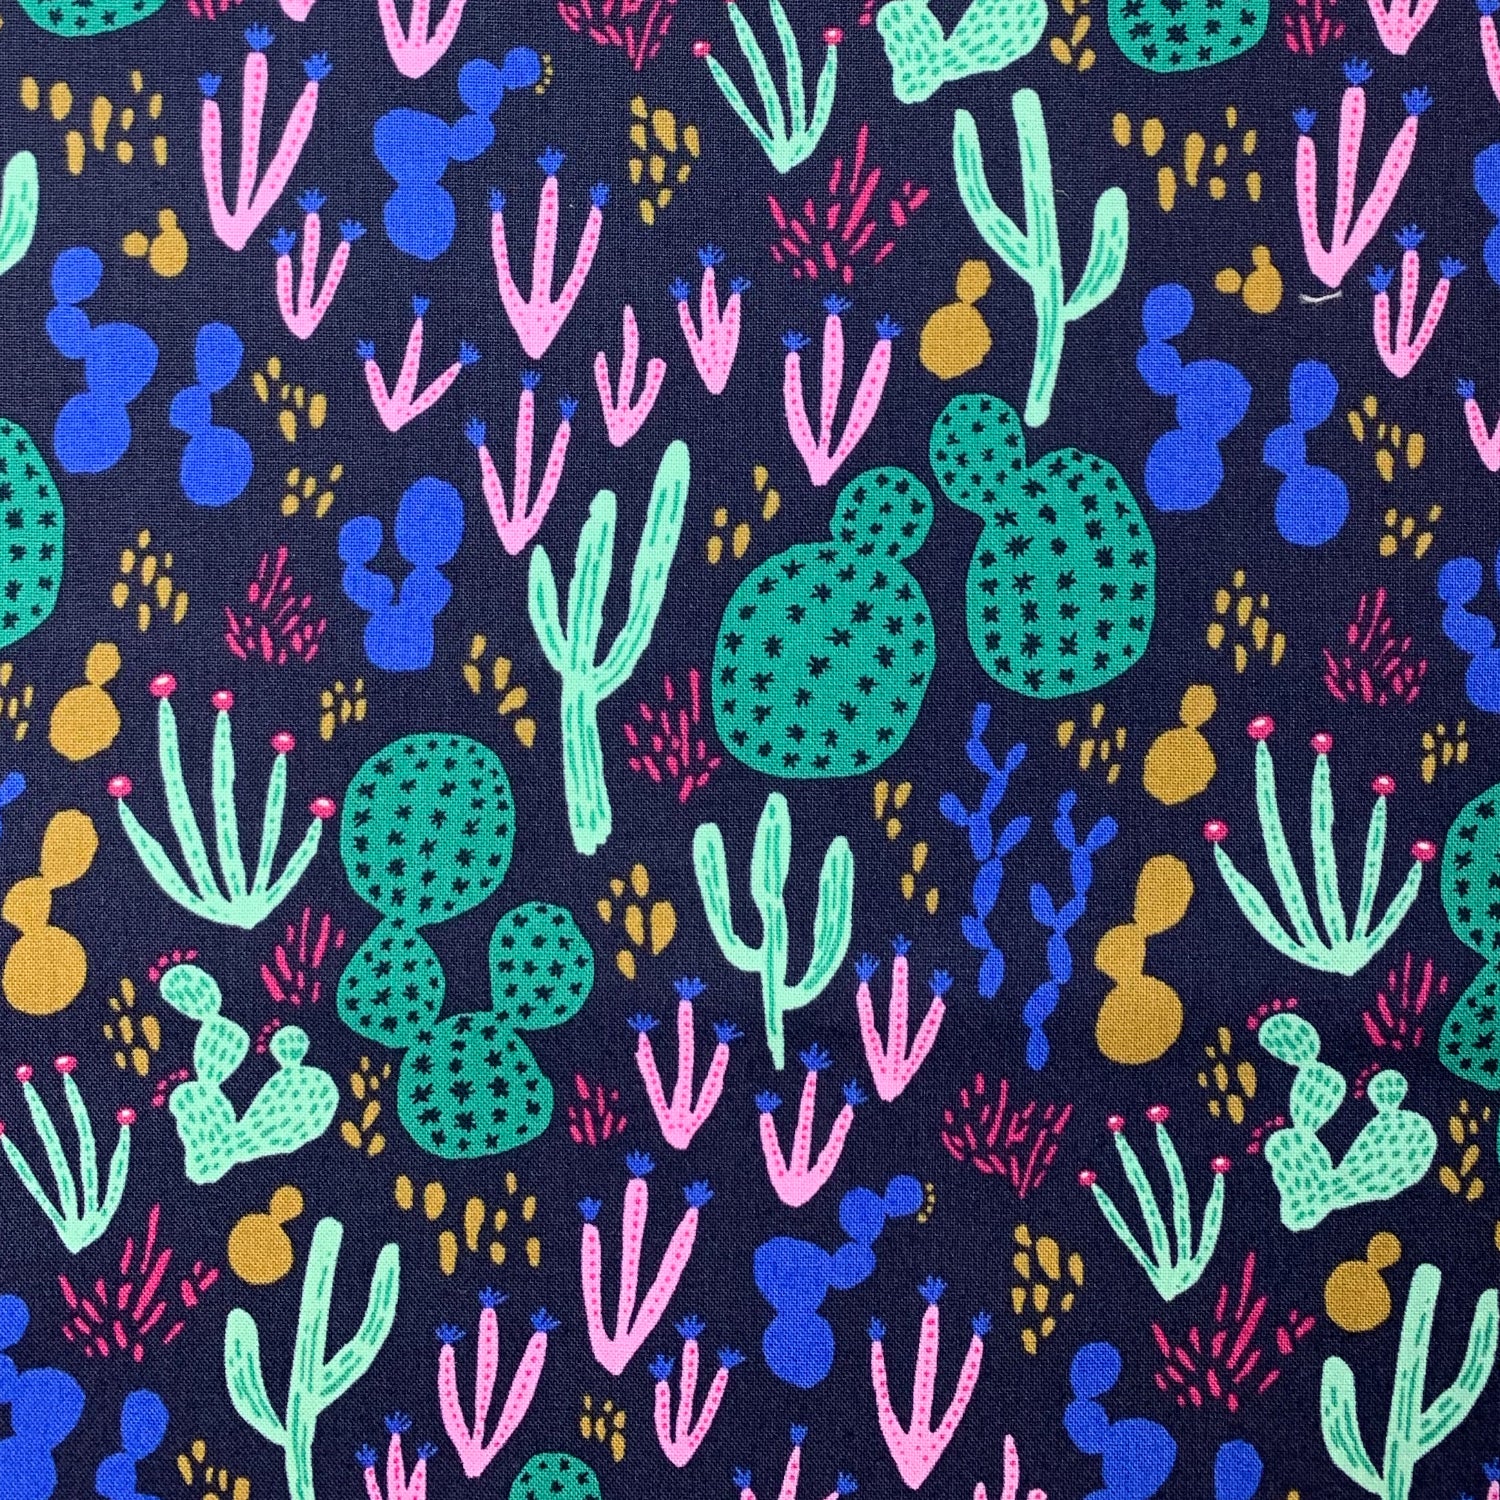 Cactus print face mask made in Melbourne